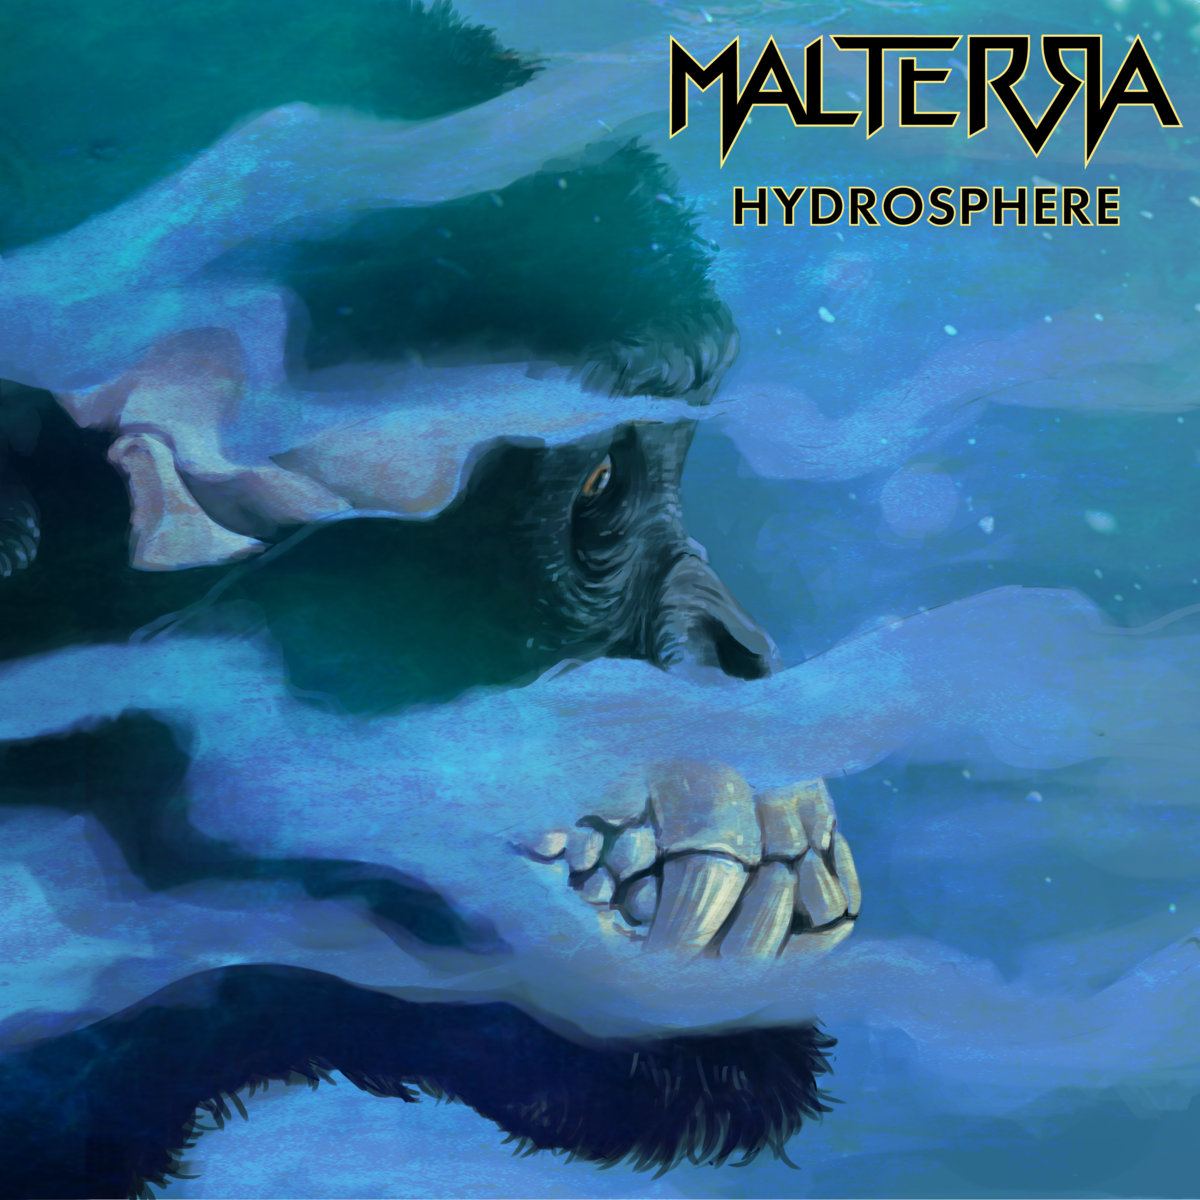 EP Review: Hydrosphere by Malterra